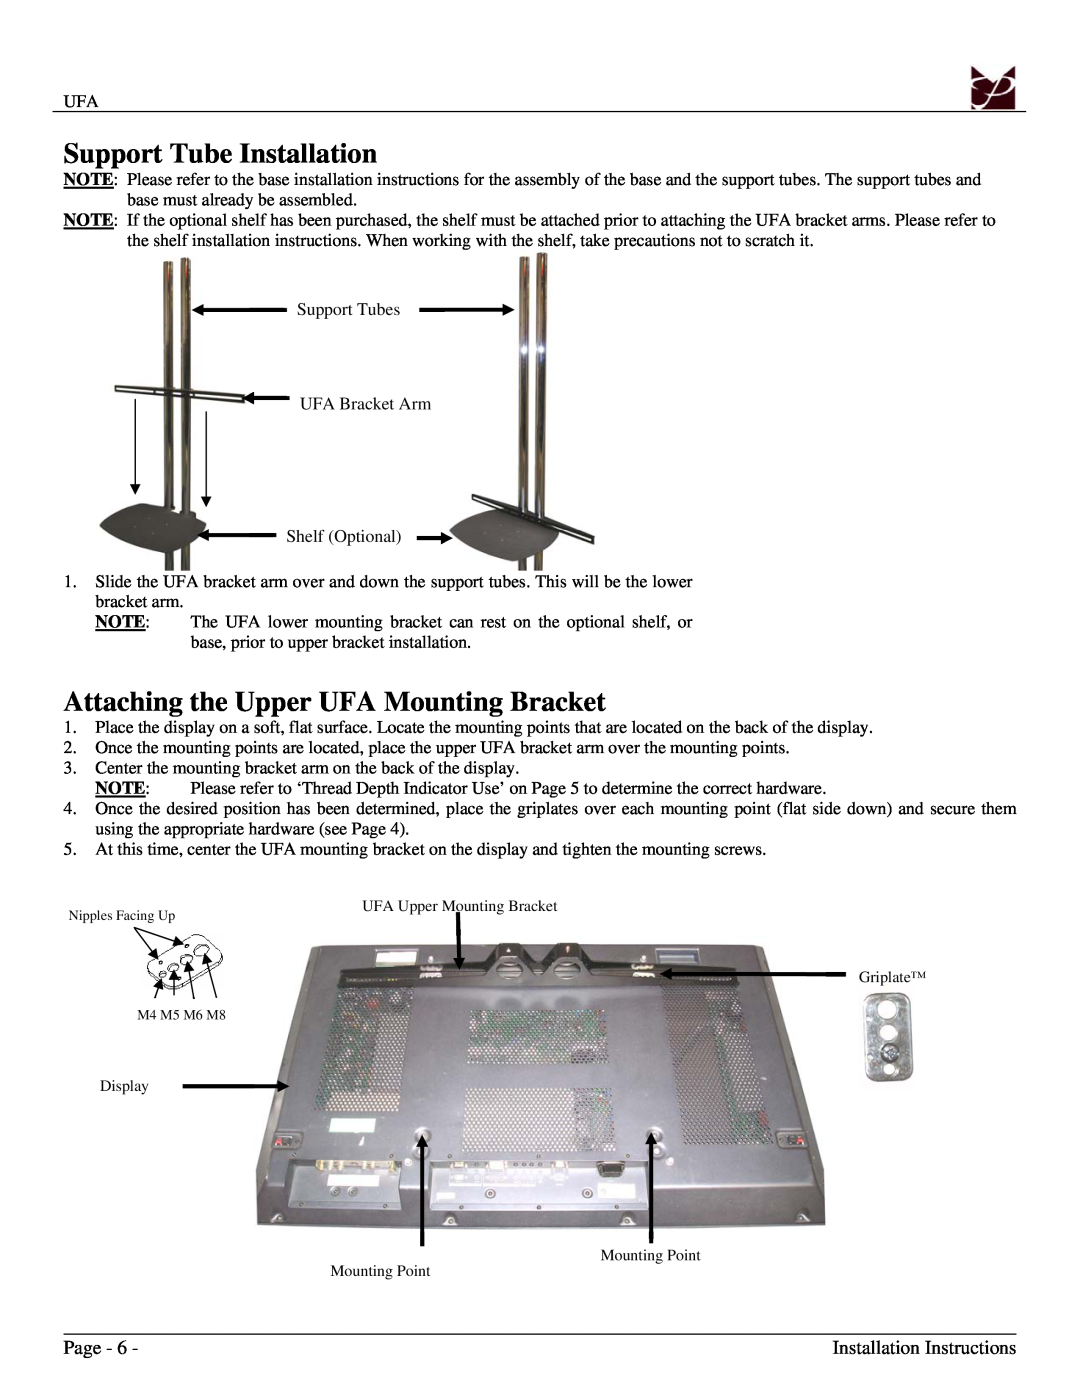 Premier Mounts Support Tube Installation, Attaching the Upper UFA Mounting Bracket, Page, Installation Instructions 